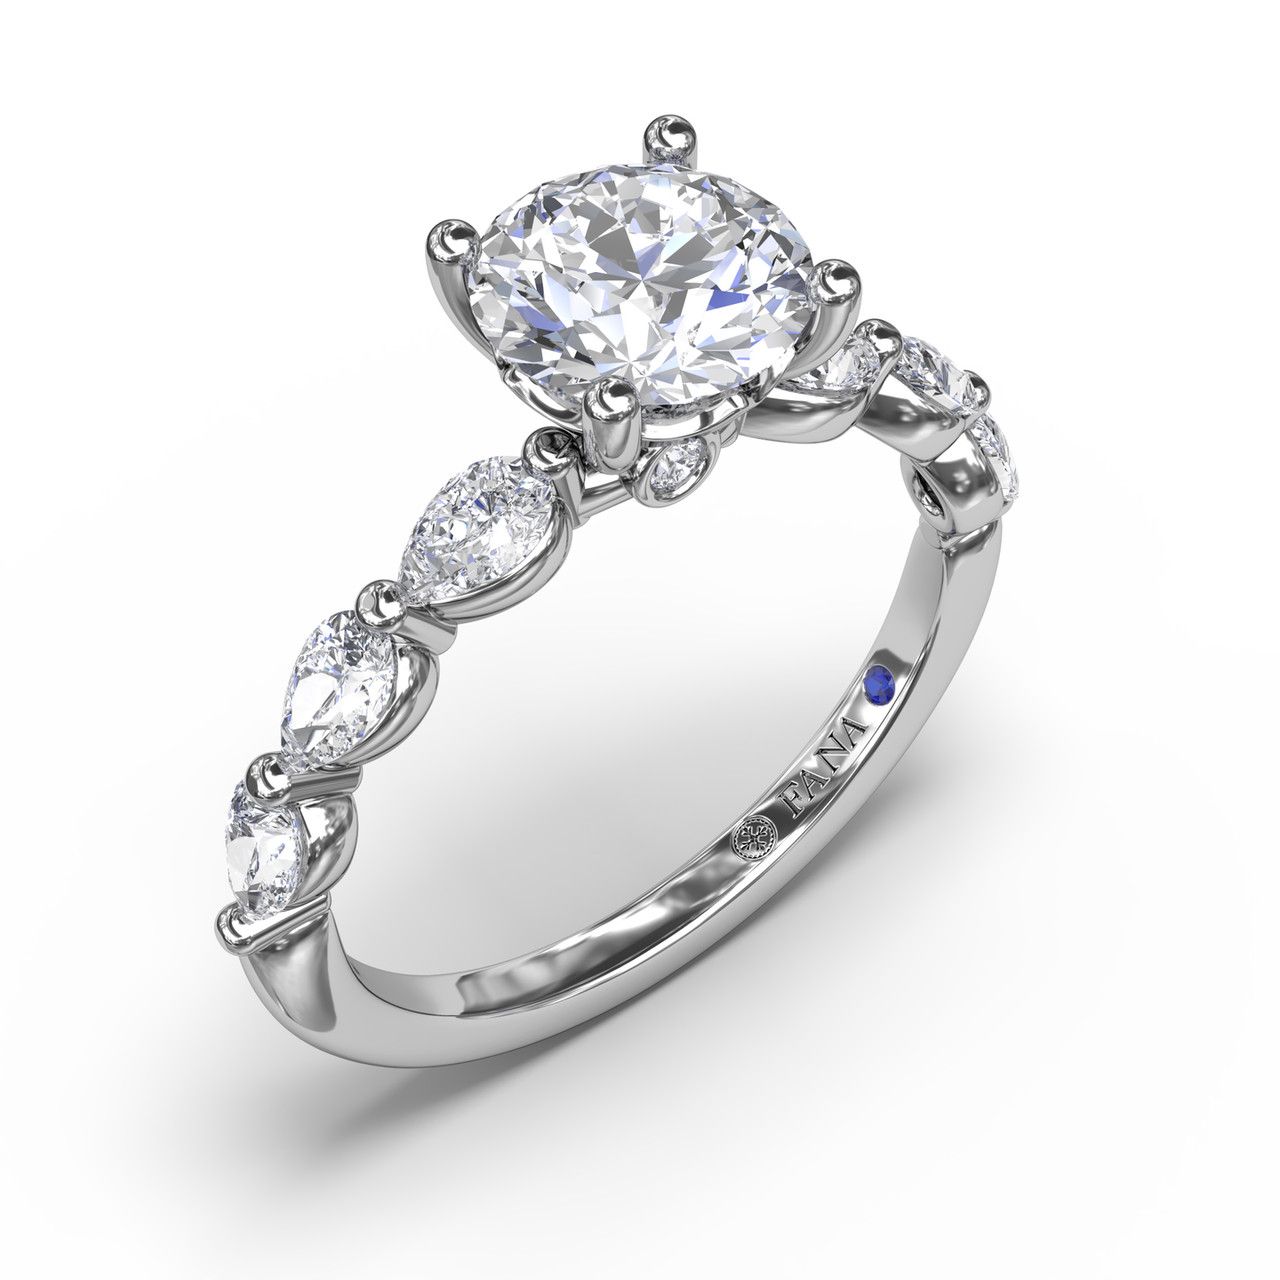 14K WHITE GOLD SHARED PRONG SEMI-MOUNT RING SIZE 6.5 WITH 6=0.54TW PEAR G-H VS2-SI1 DIAMONDS AND 2=0.02TW ROUND G-H VS2-SI1 DIAMONDS AND ONE ROUND BLUE SAPPHIRE   (2.54 GRAMS)